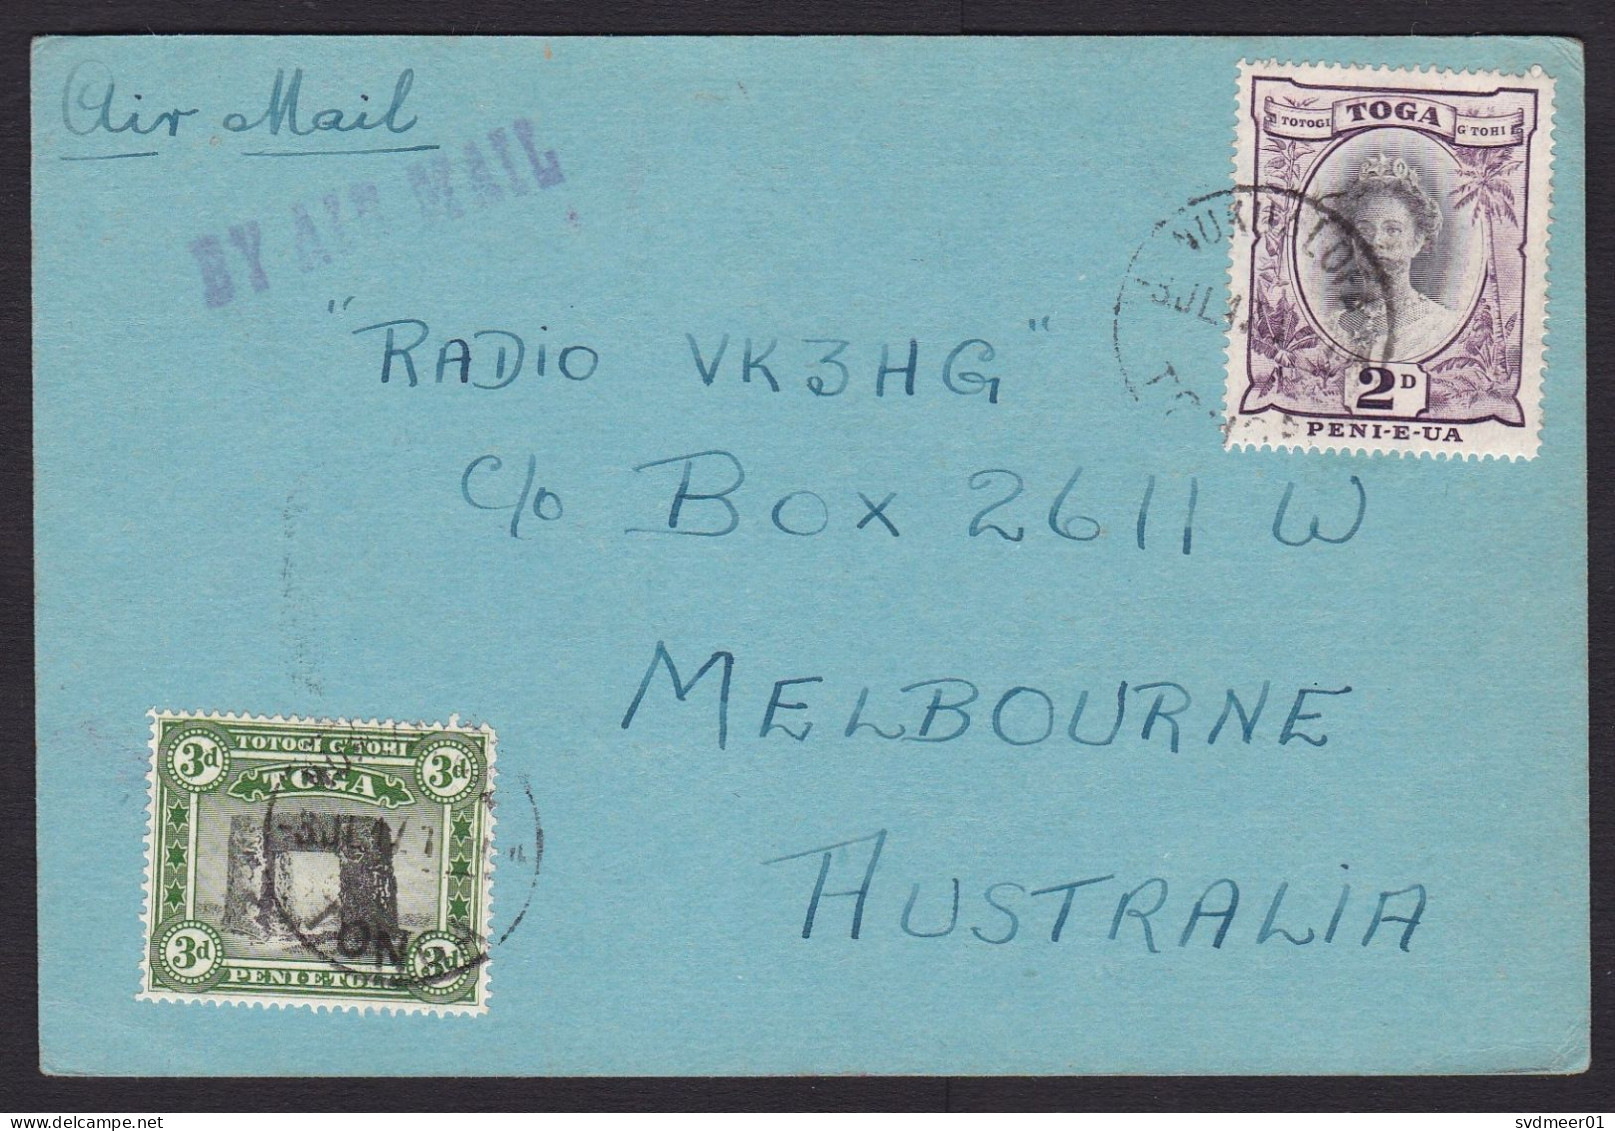 Tonga / Toga: Airmail Postcard To Australia, 1947, 2 Stamps, Queen, Ruin, Heritage, History (traces Of Use) - Tonga (1970-...)